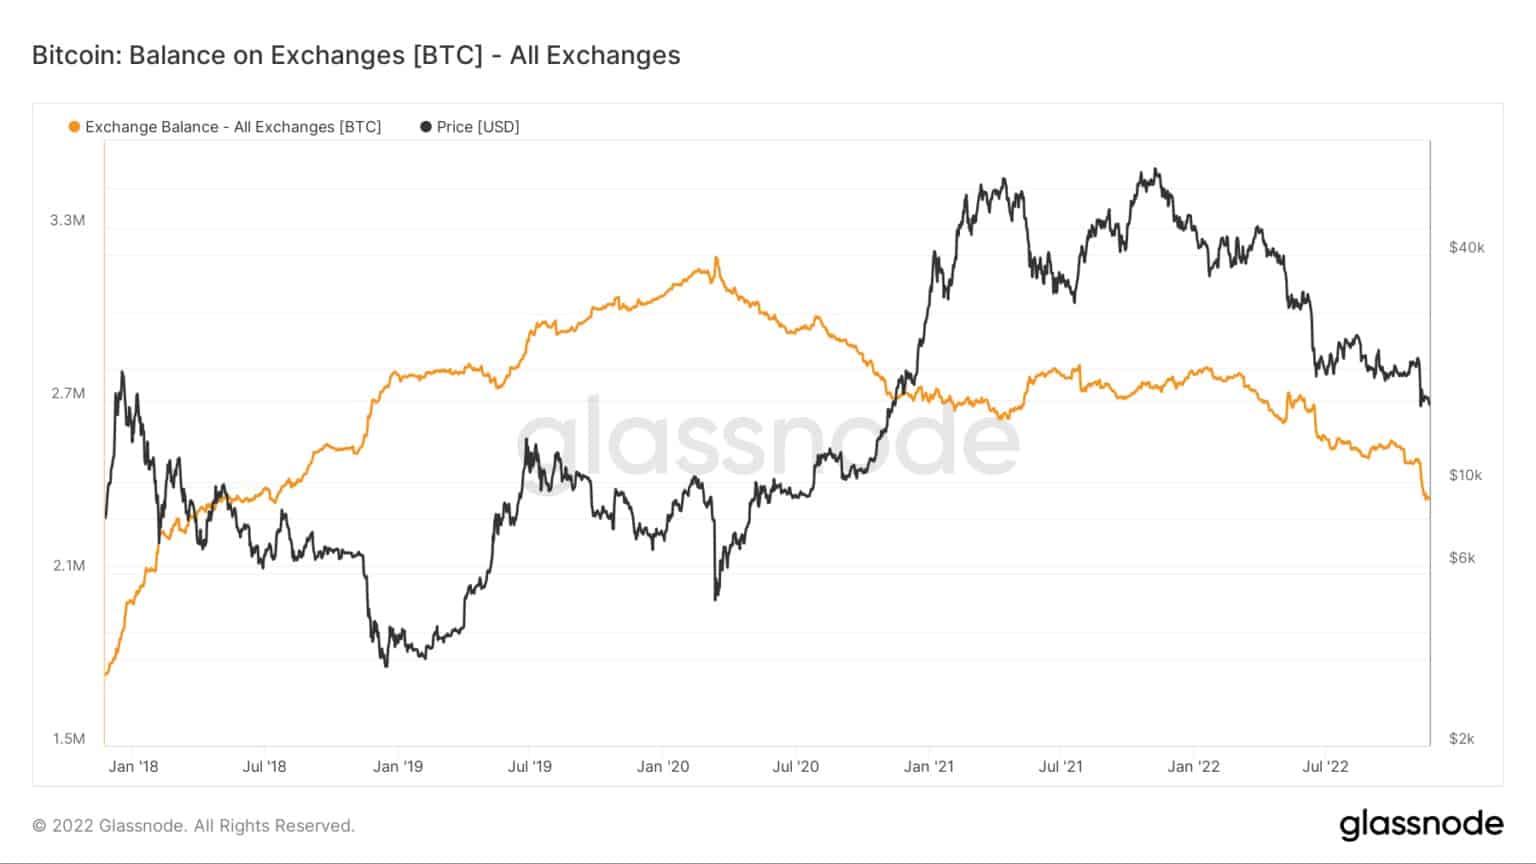 Graph showing Bitcoin balances across all centralized exchanges from 2012 to 2022 (Source: Glassnode)